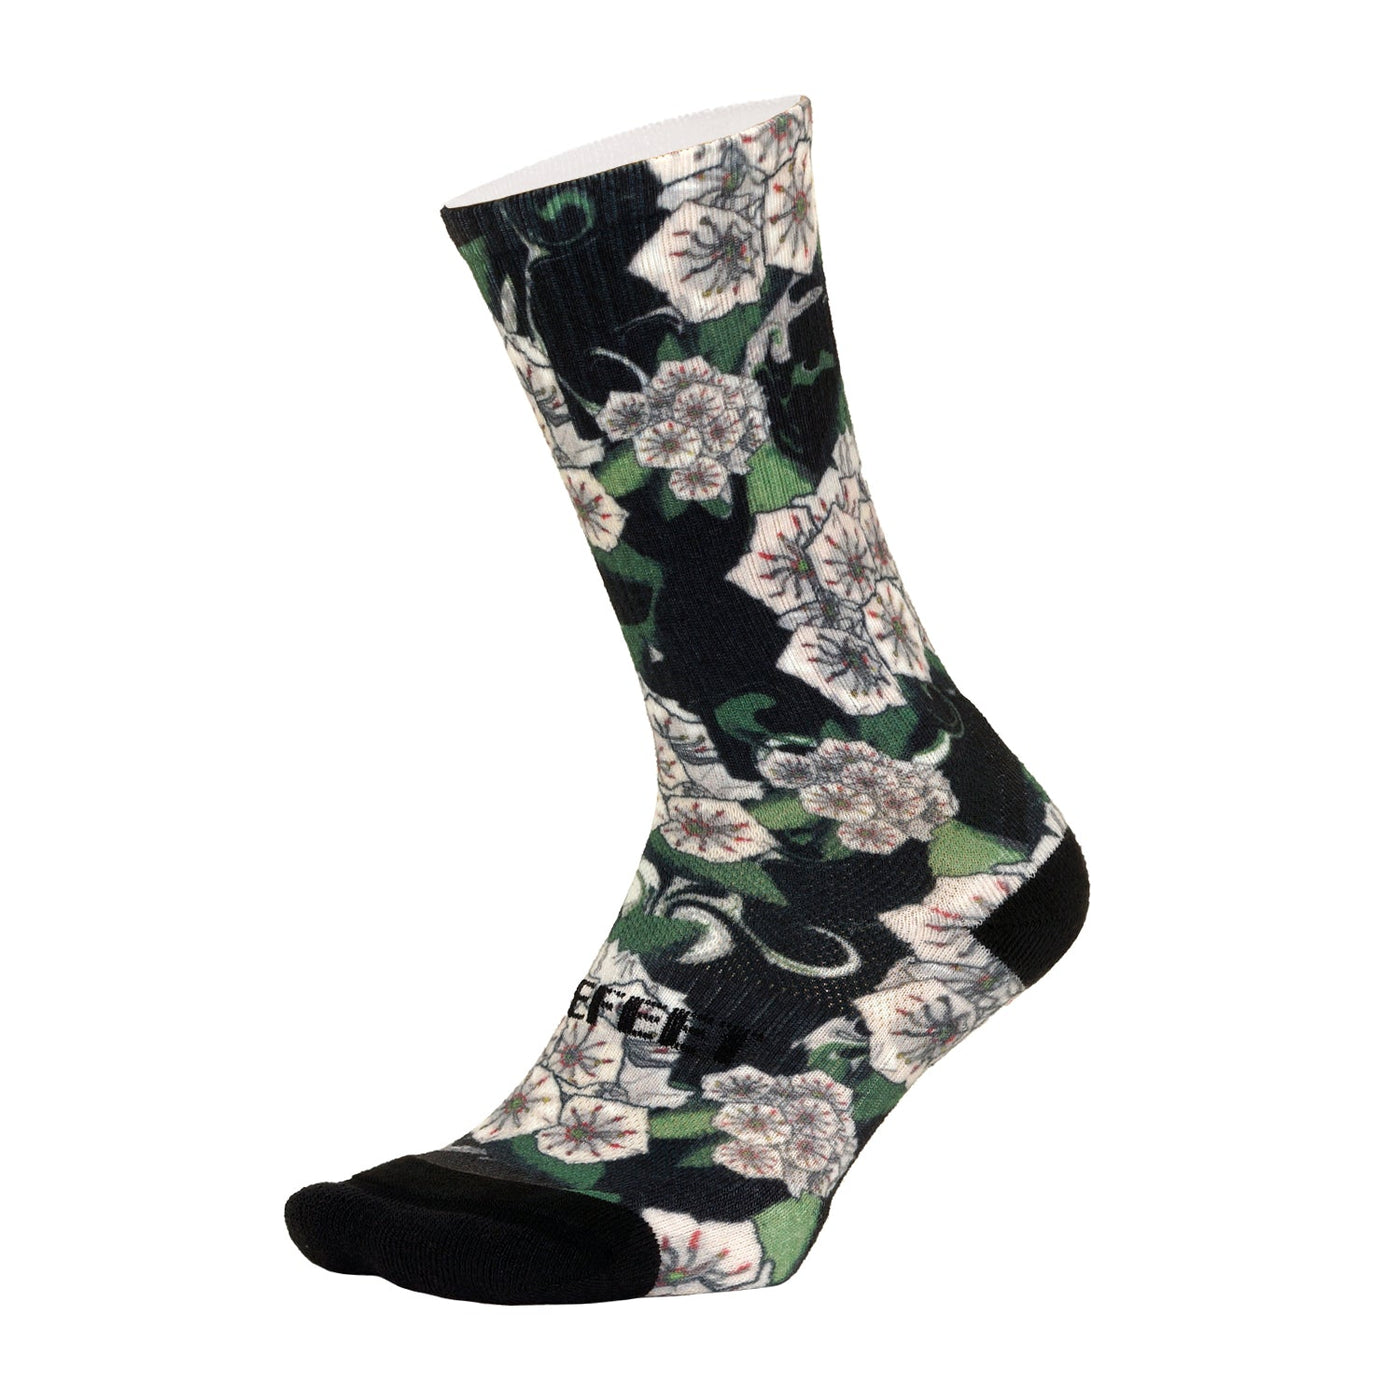 Sub360 All Day: Floral and Friends - DeFeet